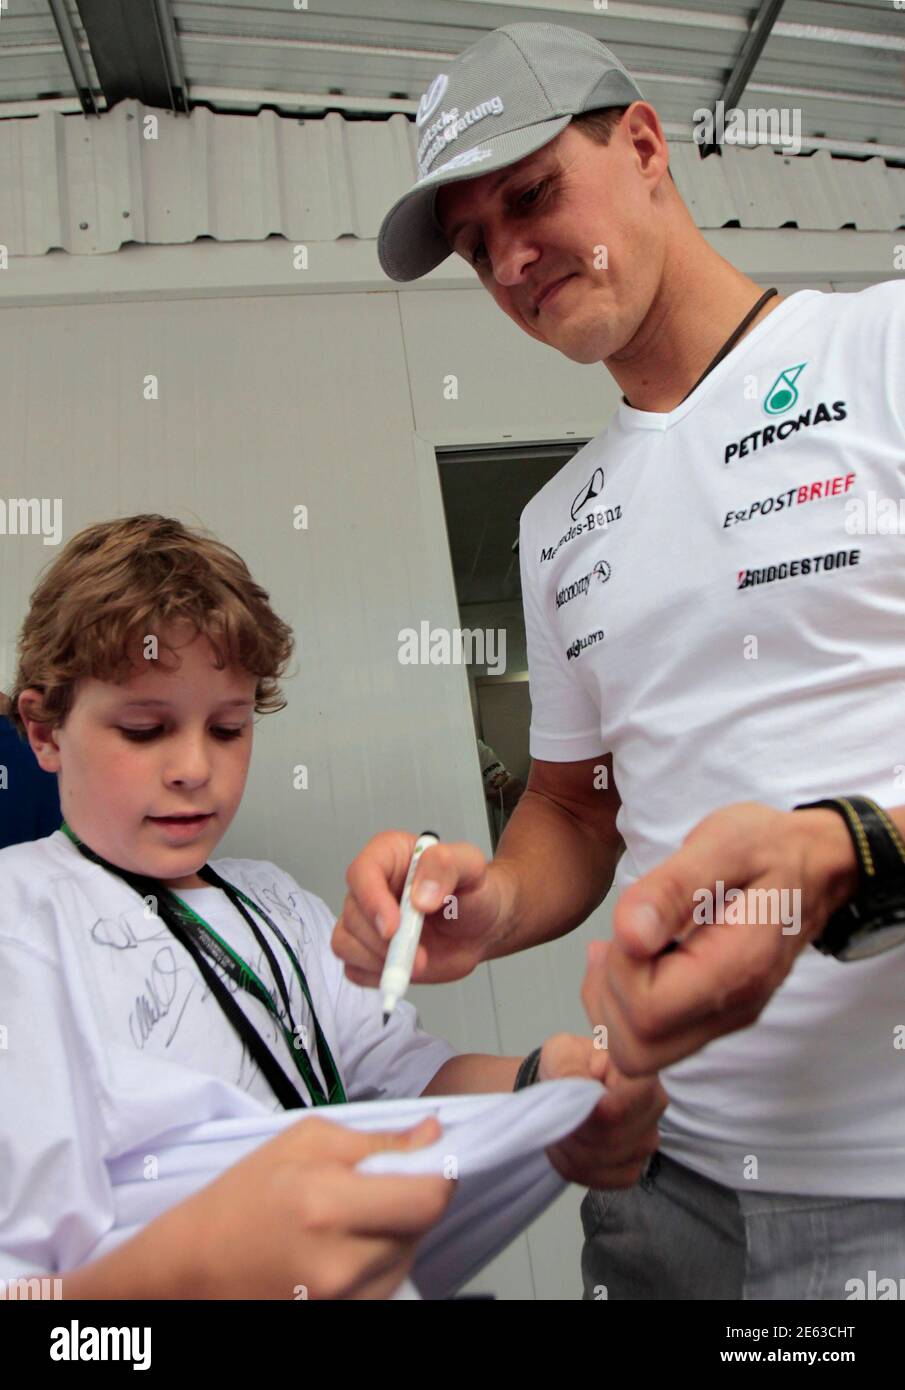 Mercedes Formula One driver Michael Schumacher of Germany signs an autograph at the Interlagos racetrack as teams prepared for Sunday's Brazilian GP F1 race in Sao Paulo November 4, 2010.                REUTERS/Paulo Whitaker (BRAZIL - Tags: SPORT MOTOR RACING) Stock Photo